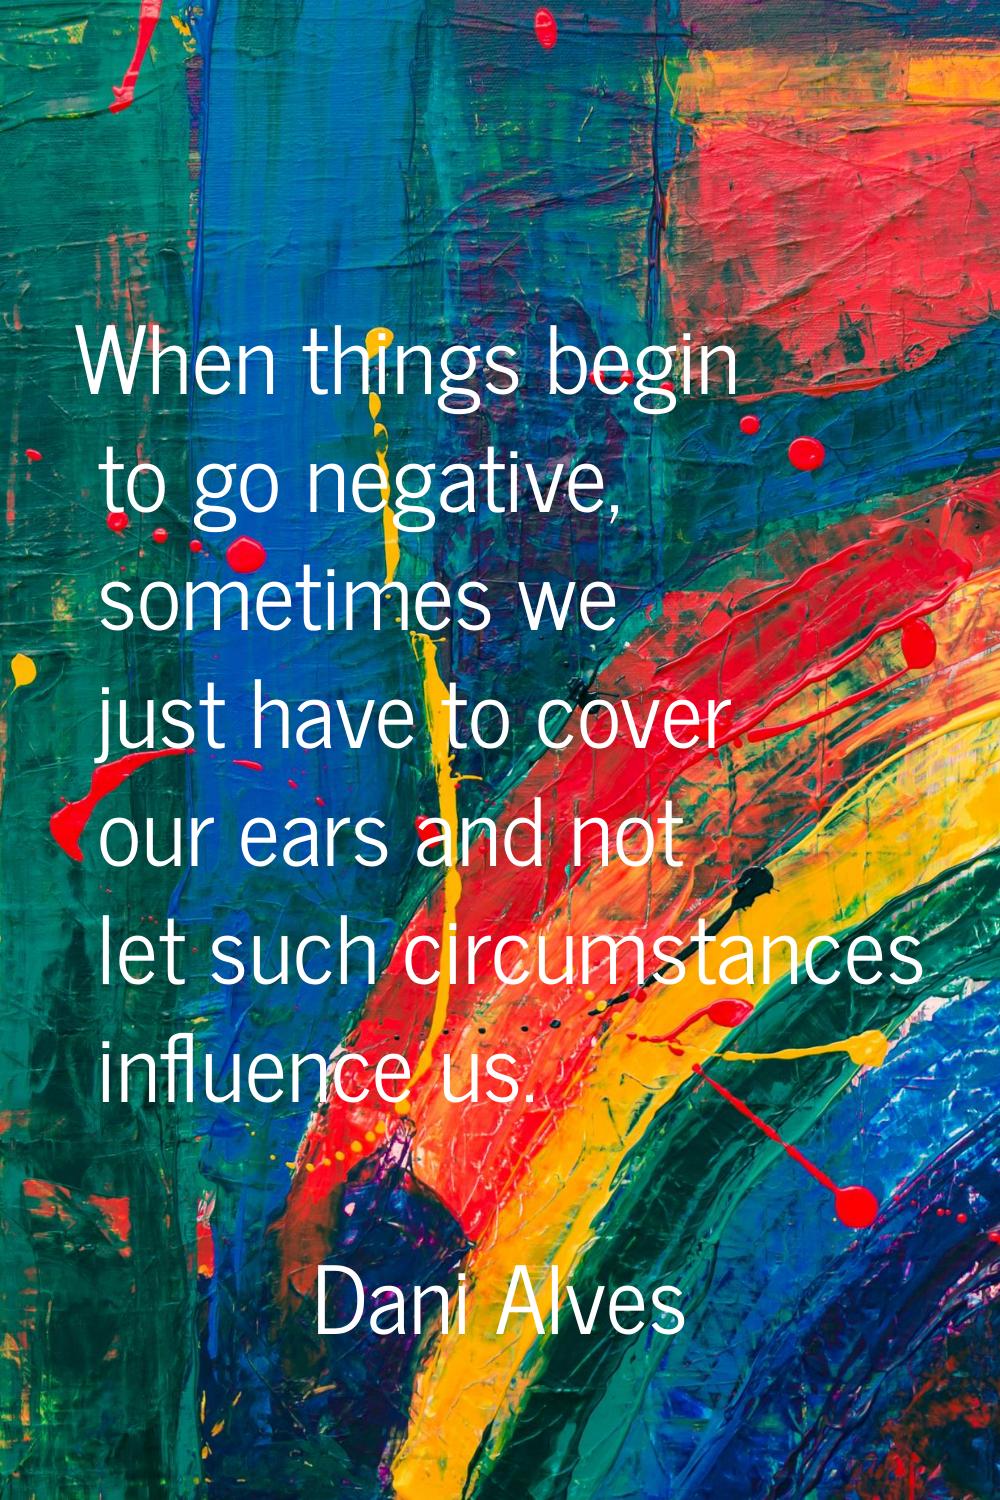 When things begin to go negative, sometimes we just have to cover our ears and not let such circums